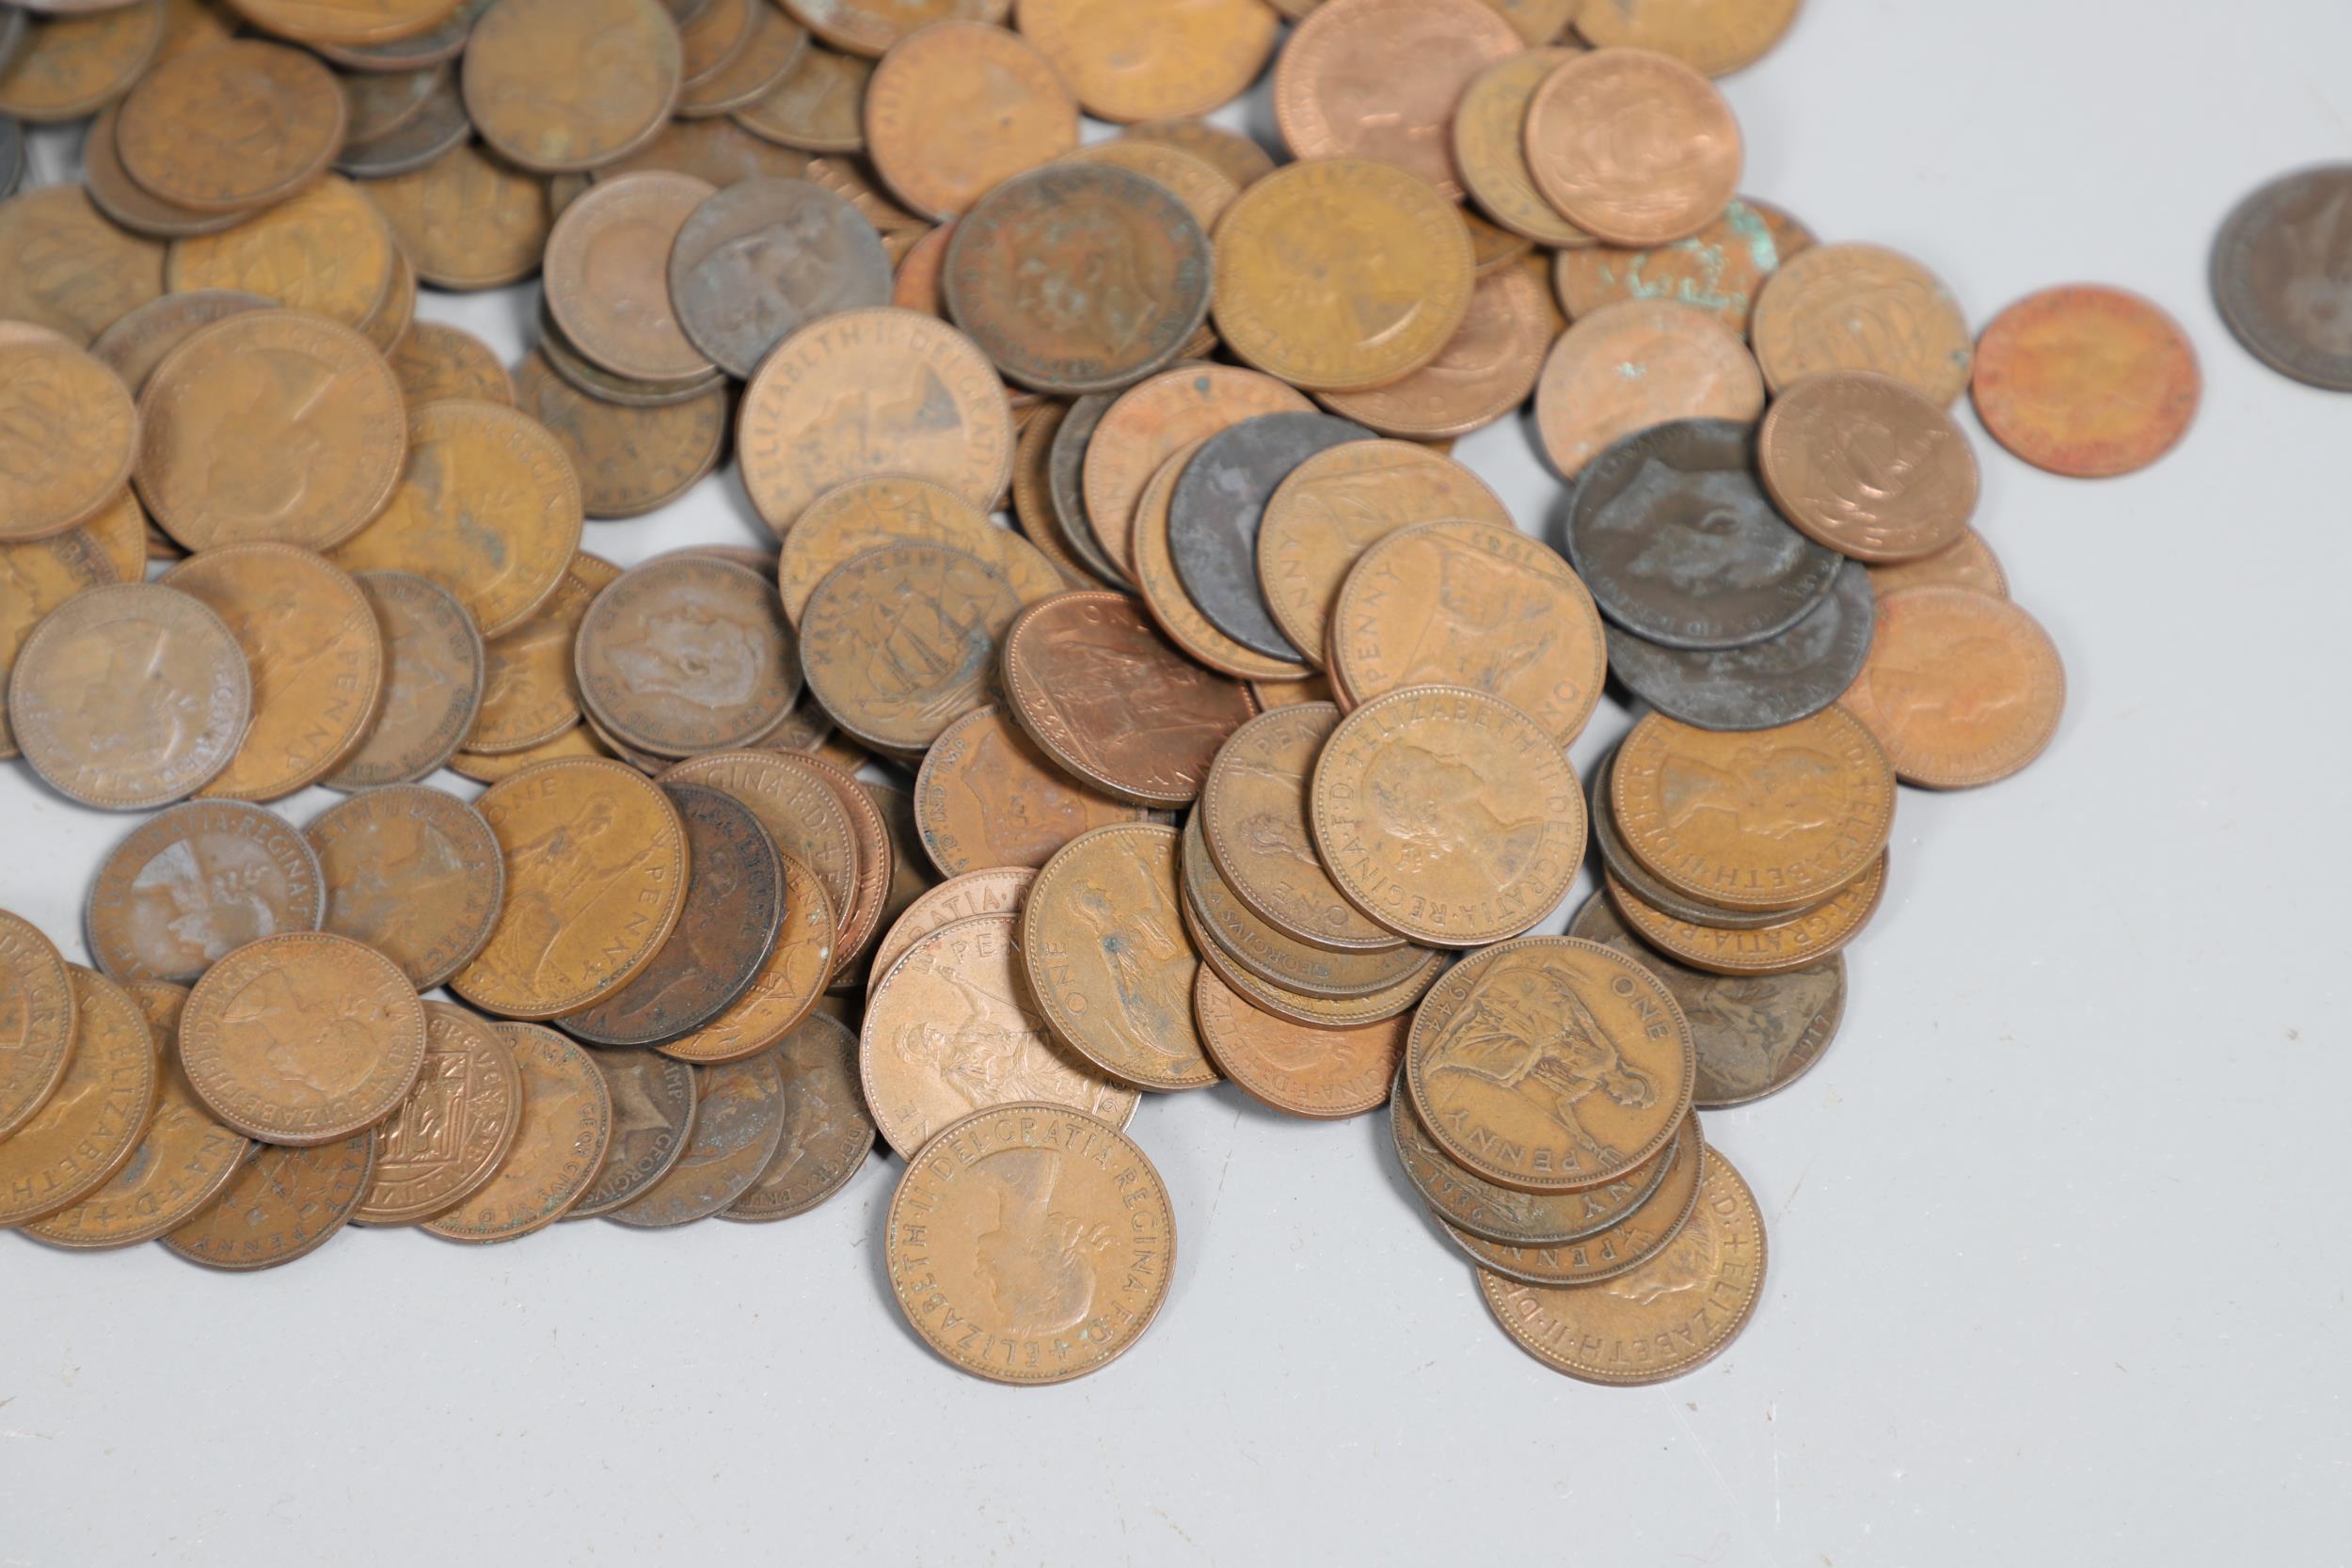 A LARGE COLLECTION OF WORLD COINS AND SIMILAR BRITISH COINS. - Image 20 of 20